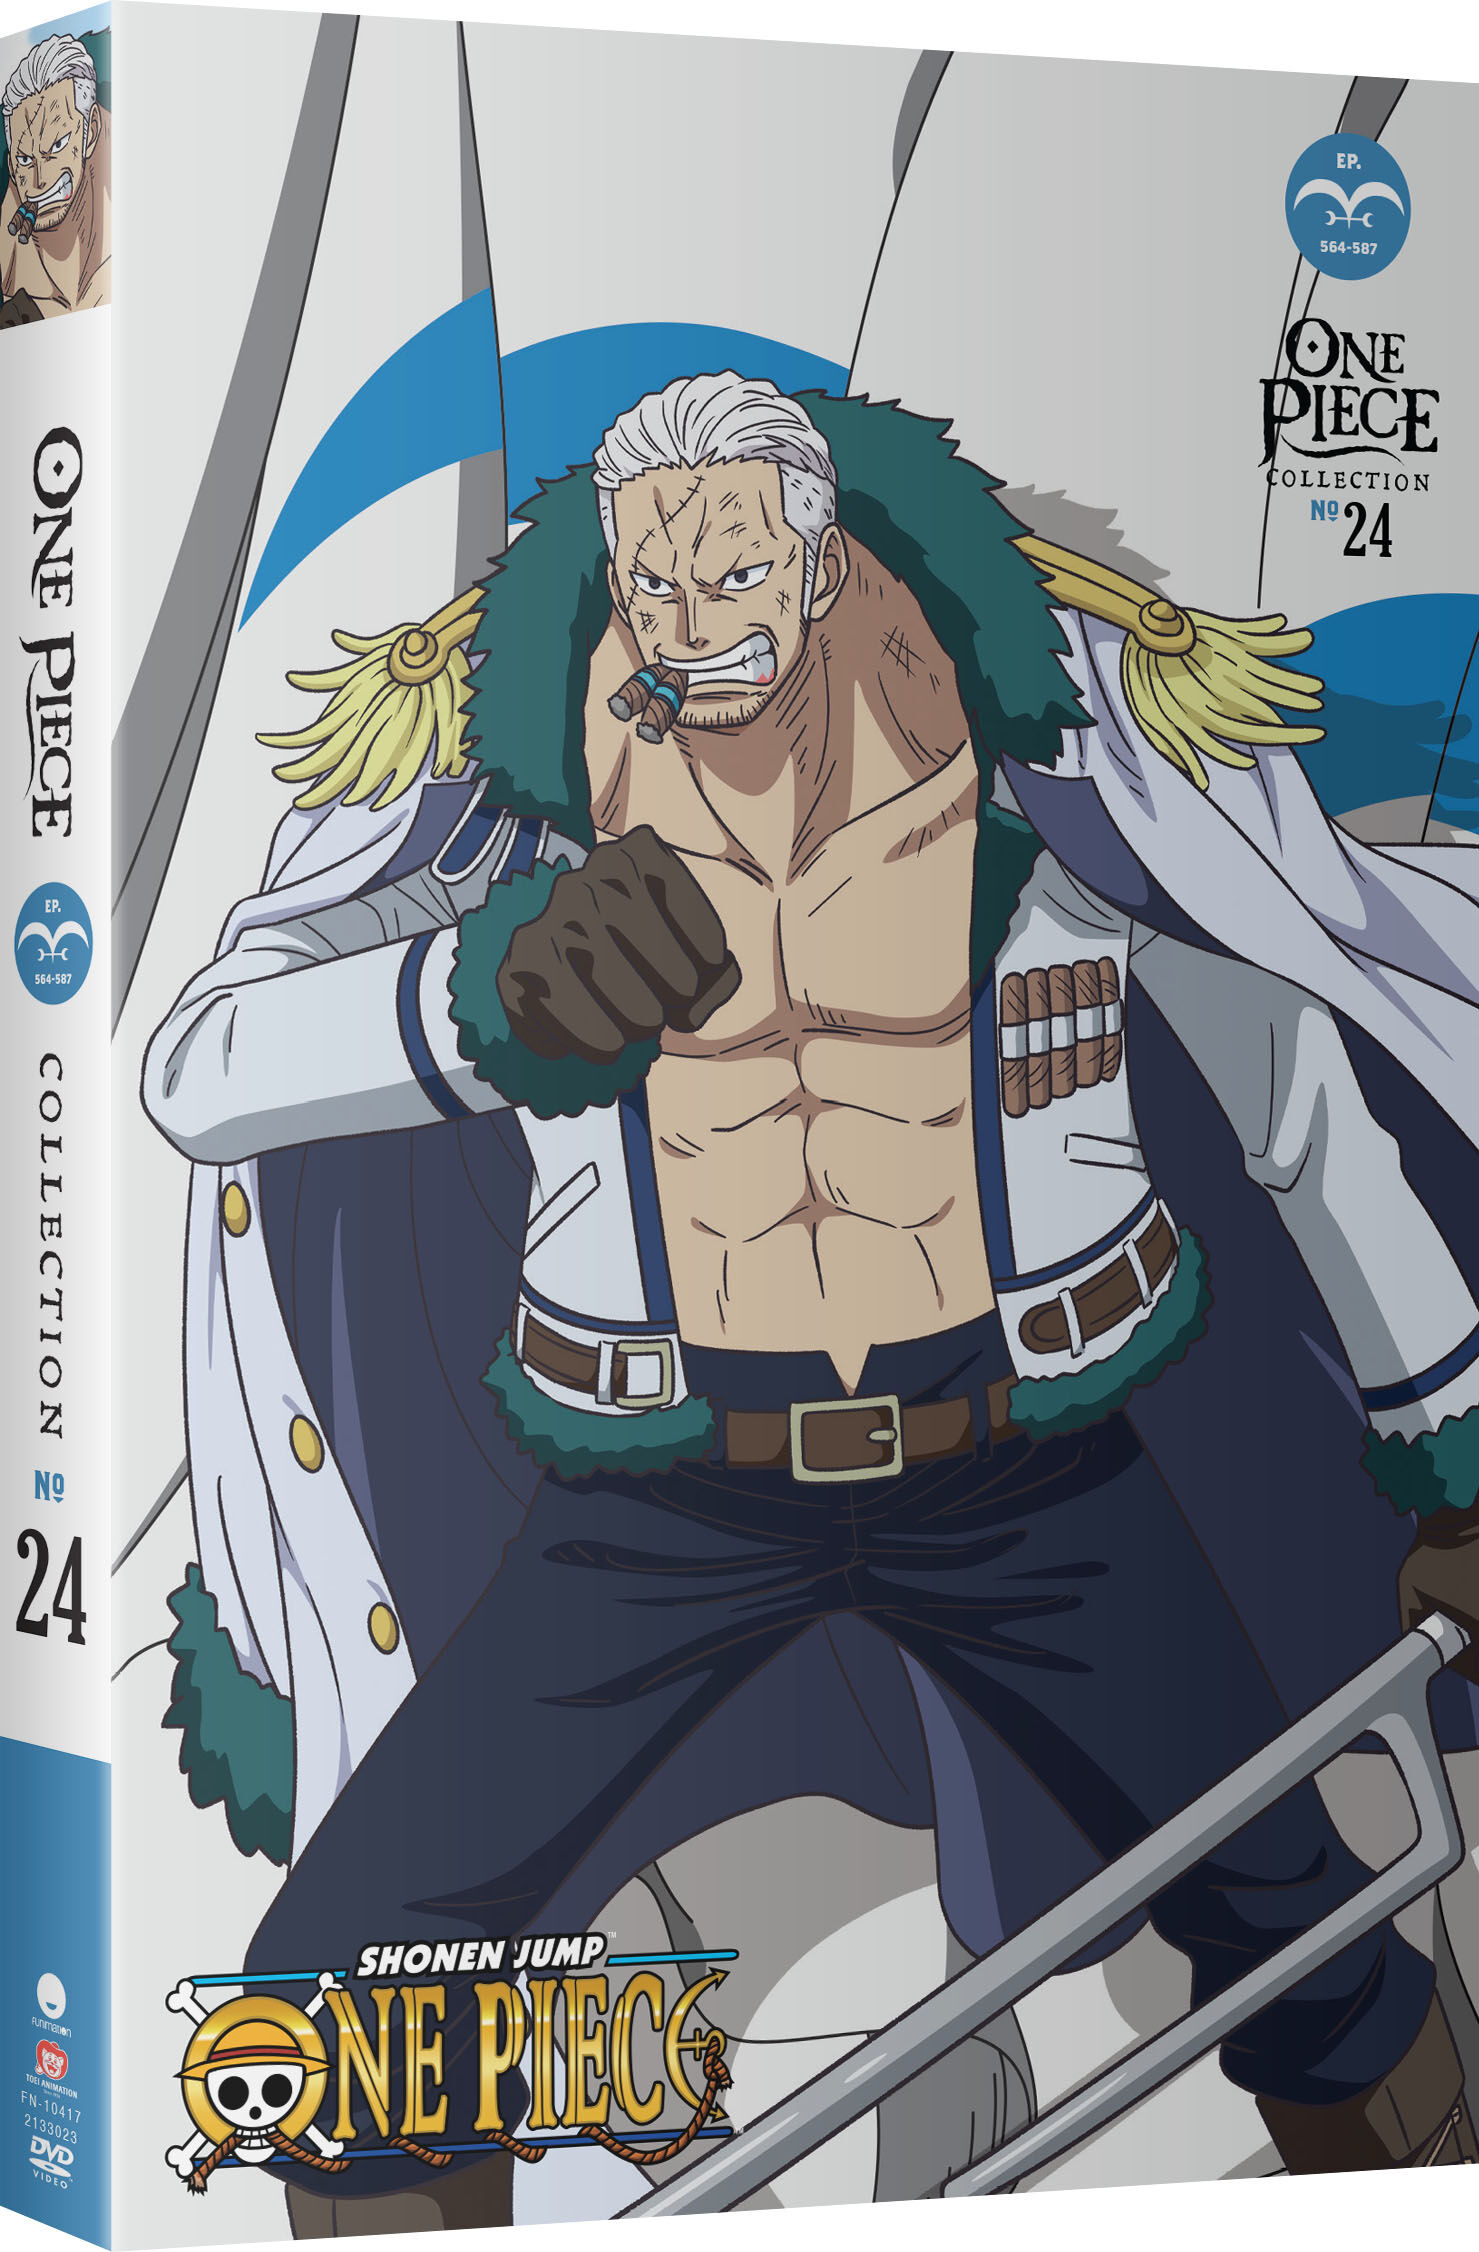 One Piece - Collection 24 - DVD | Crunchyroll Store